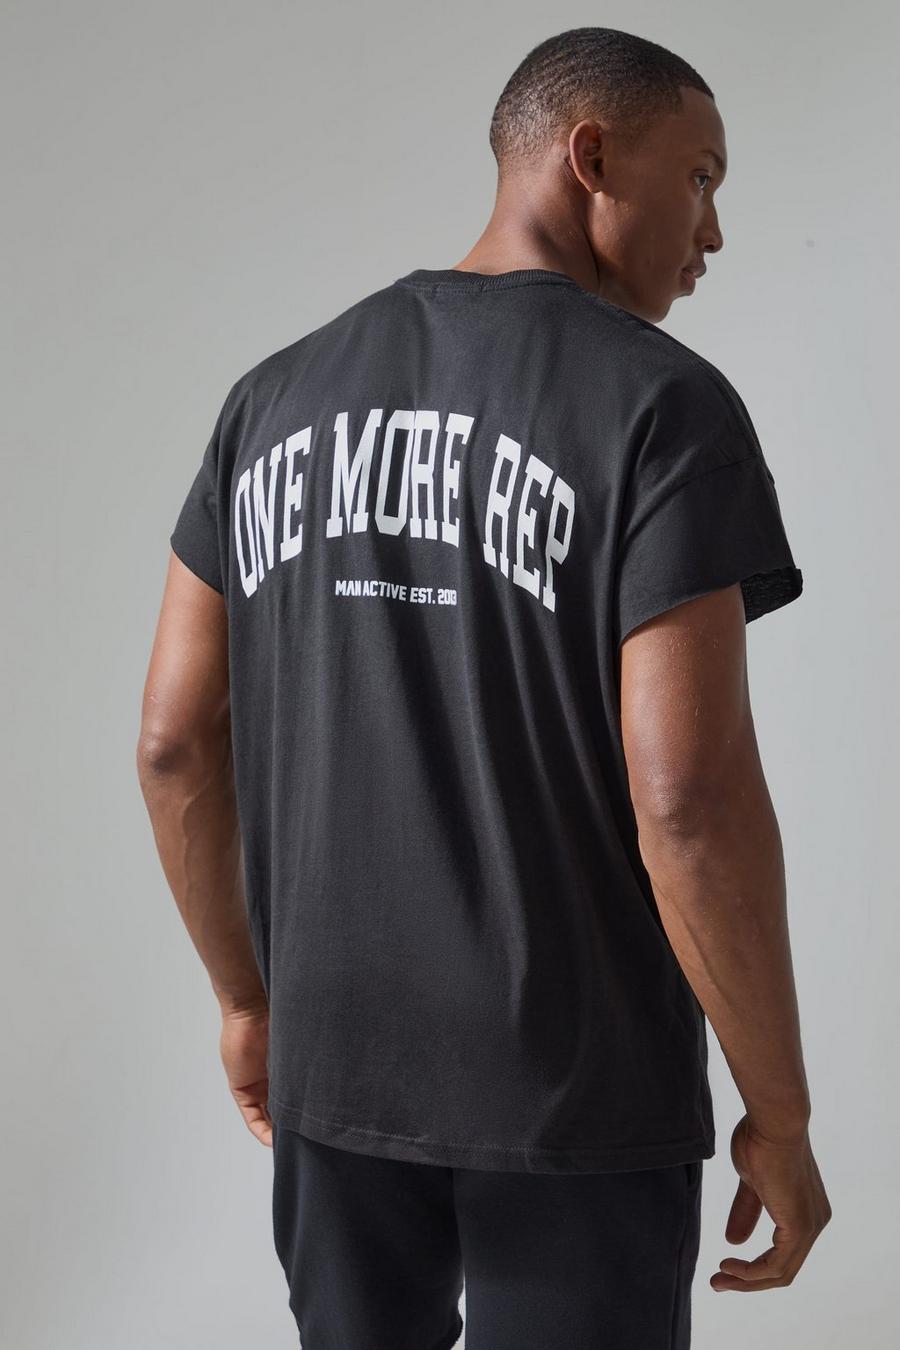 Black MAN Active One More Rep Cut Off Oversize t-shirt image number 1